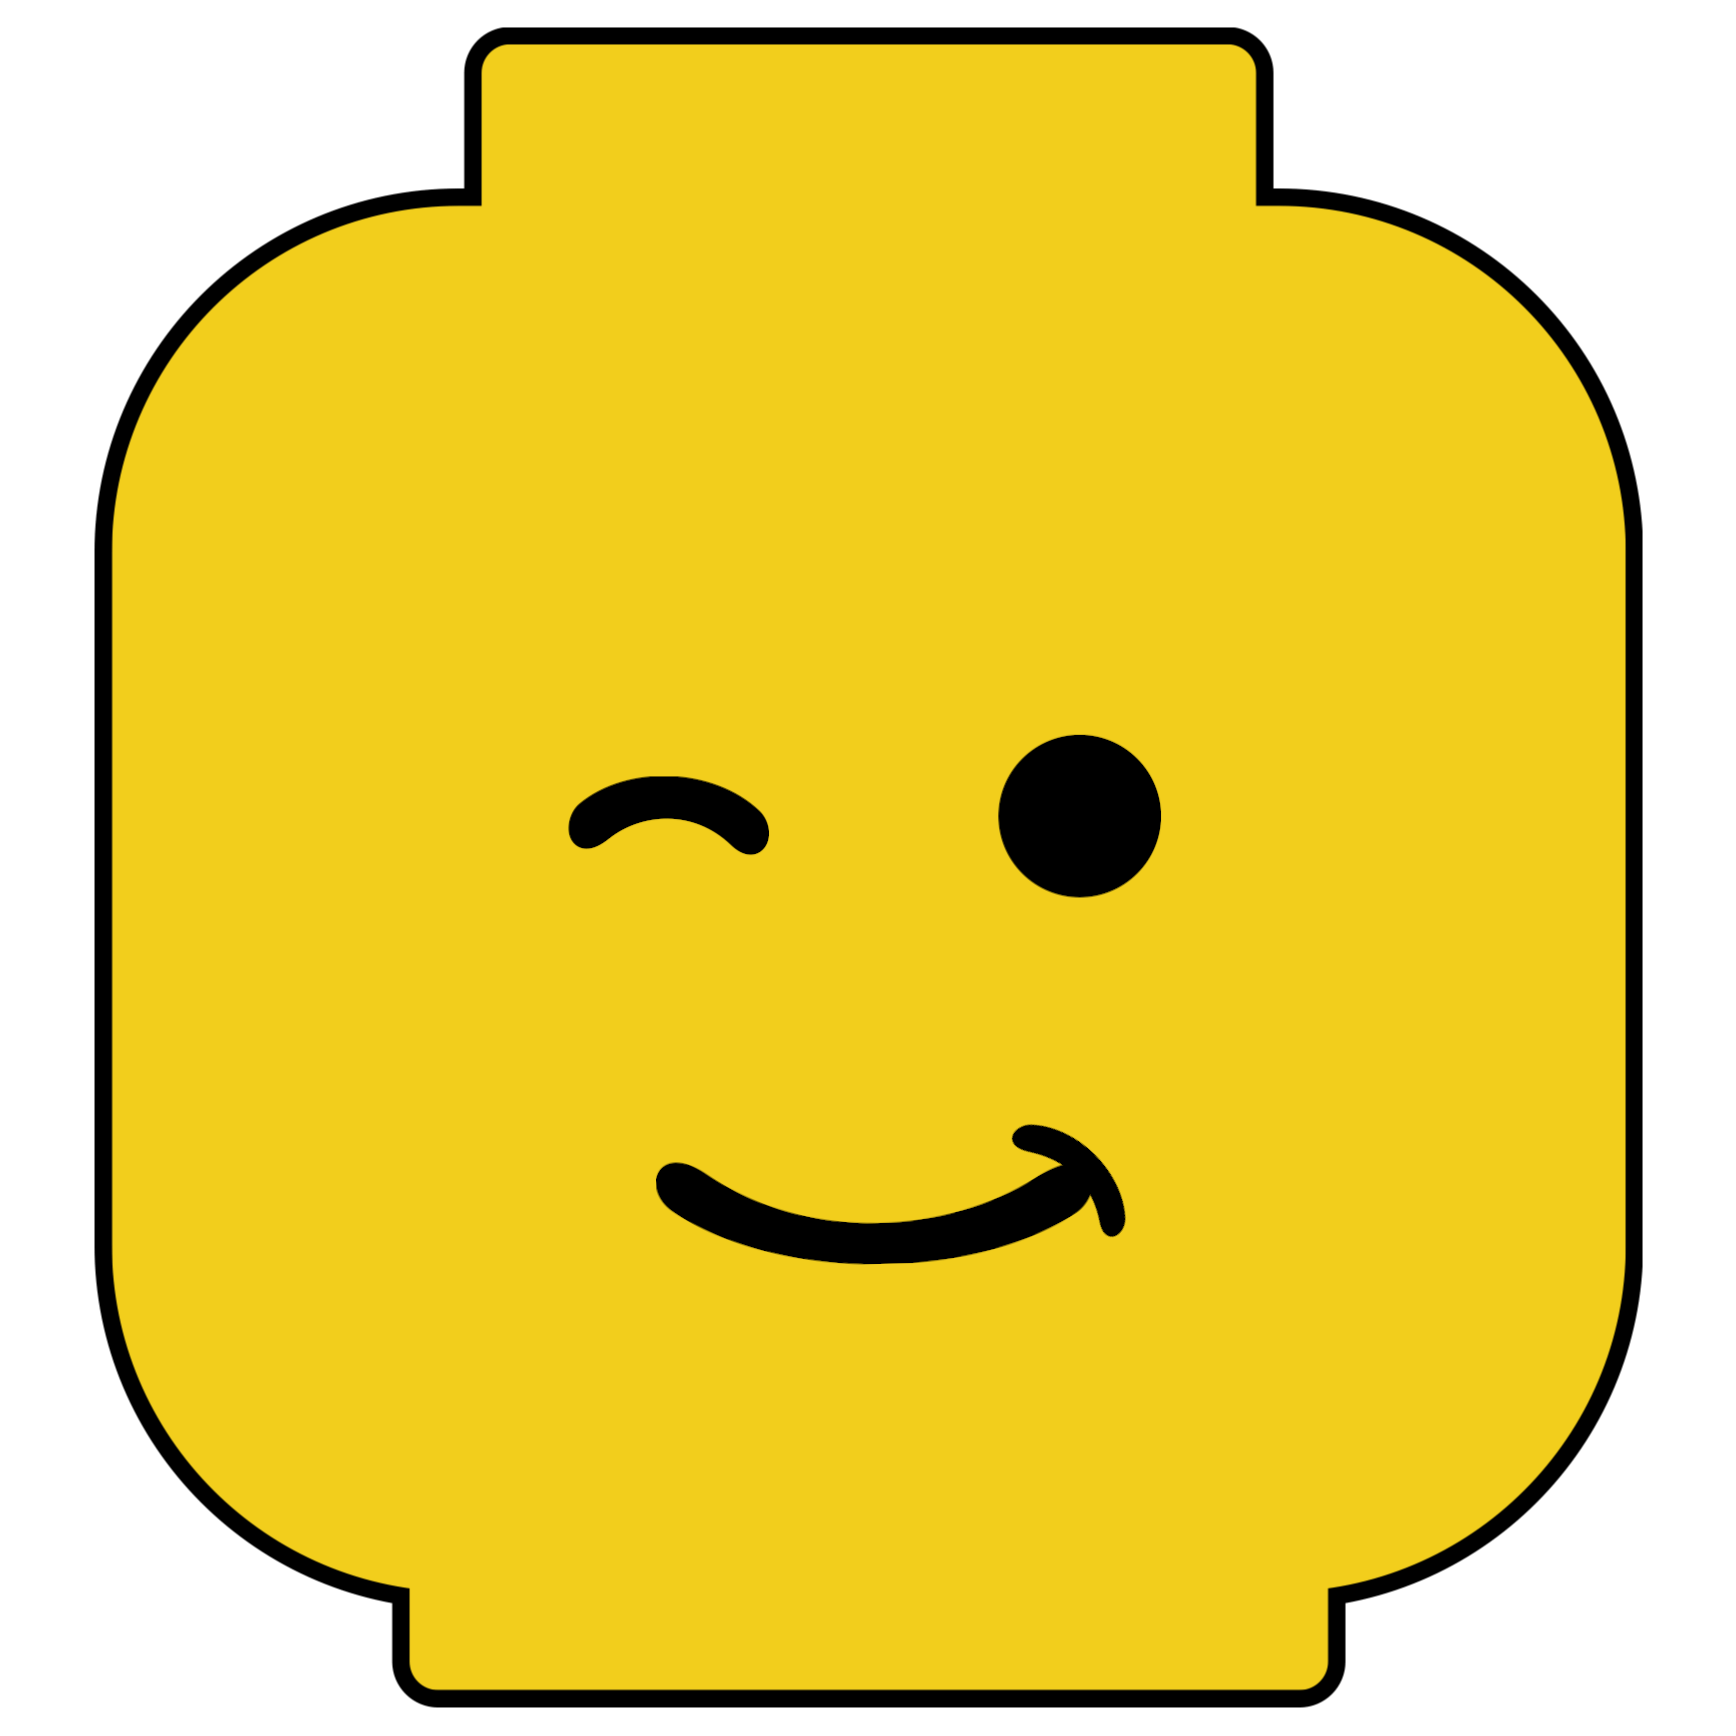 Lego Face PNG HD Quality